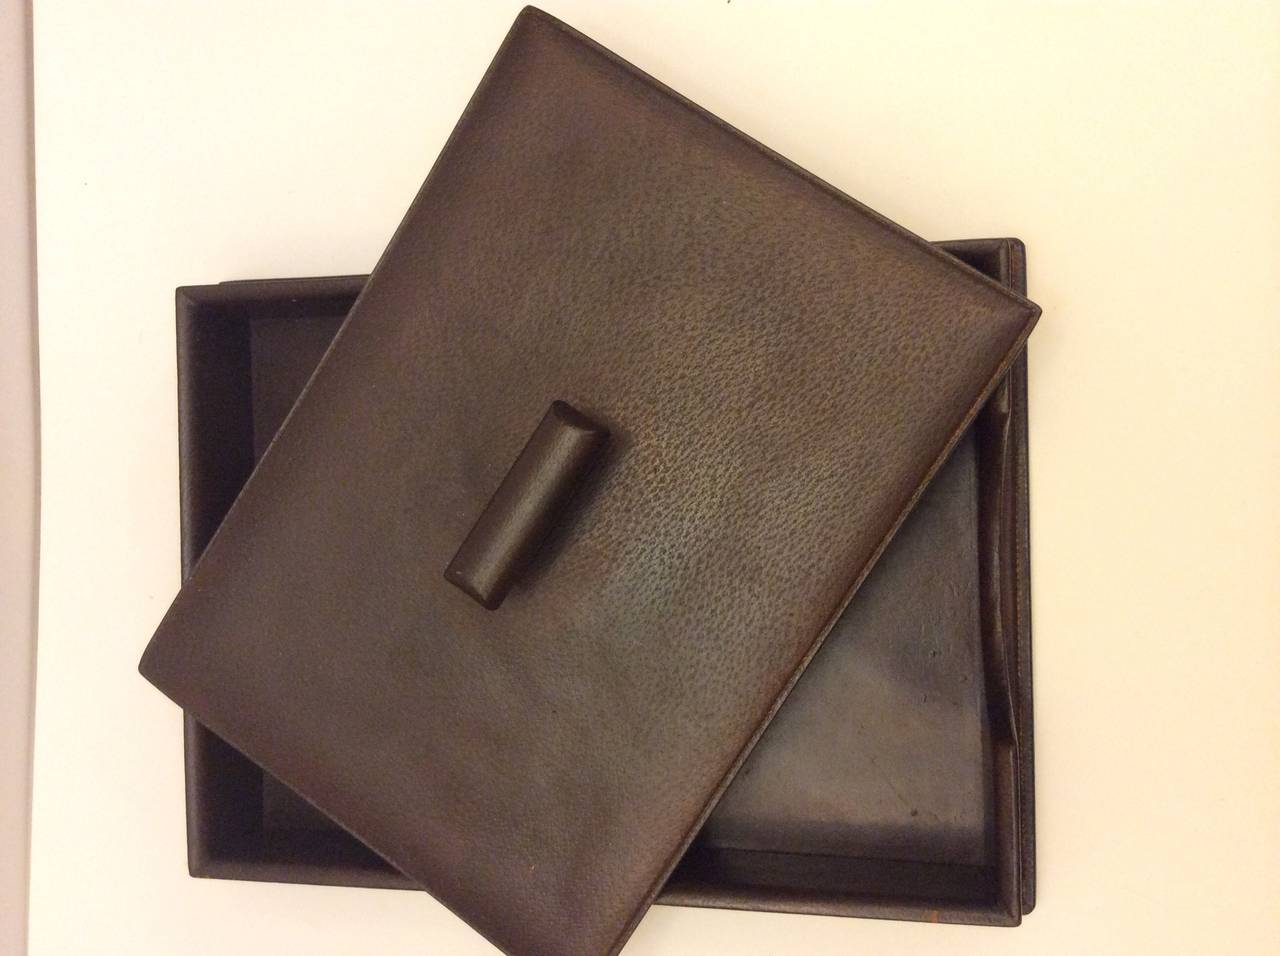 Vintage Gucci Desktop Brown Leather Paper-tray & Notepad Gold Chain In Fair Condition For Sale In Lake Park, FL